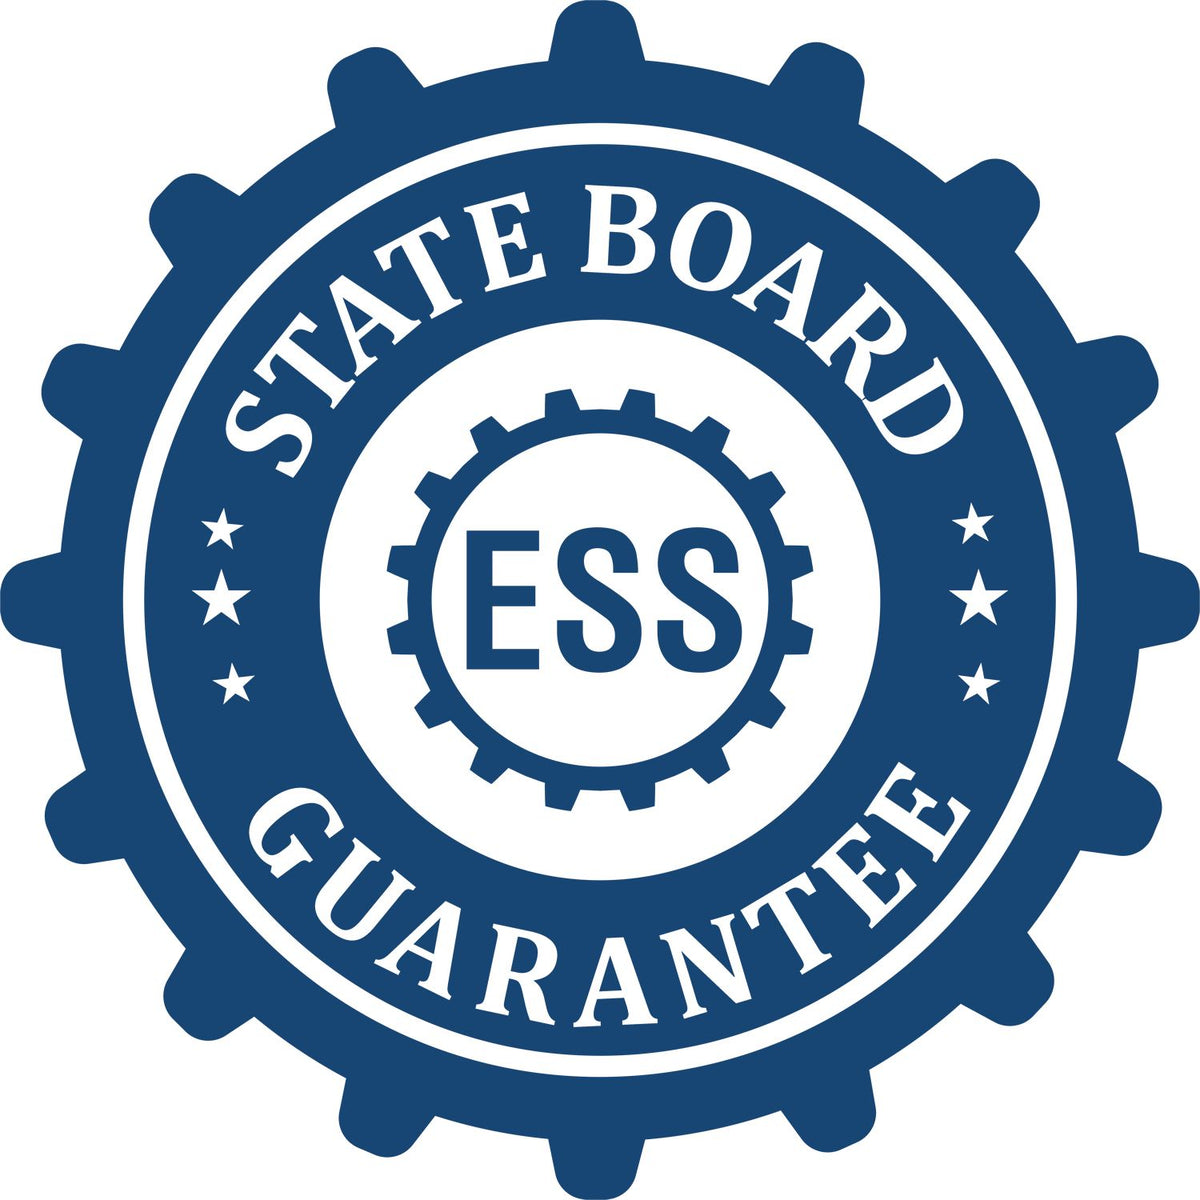 An emblem in a gear shape illustrating a state board guarantee for the South Carolina Professional Engineer Seal Stamp product.